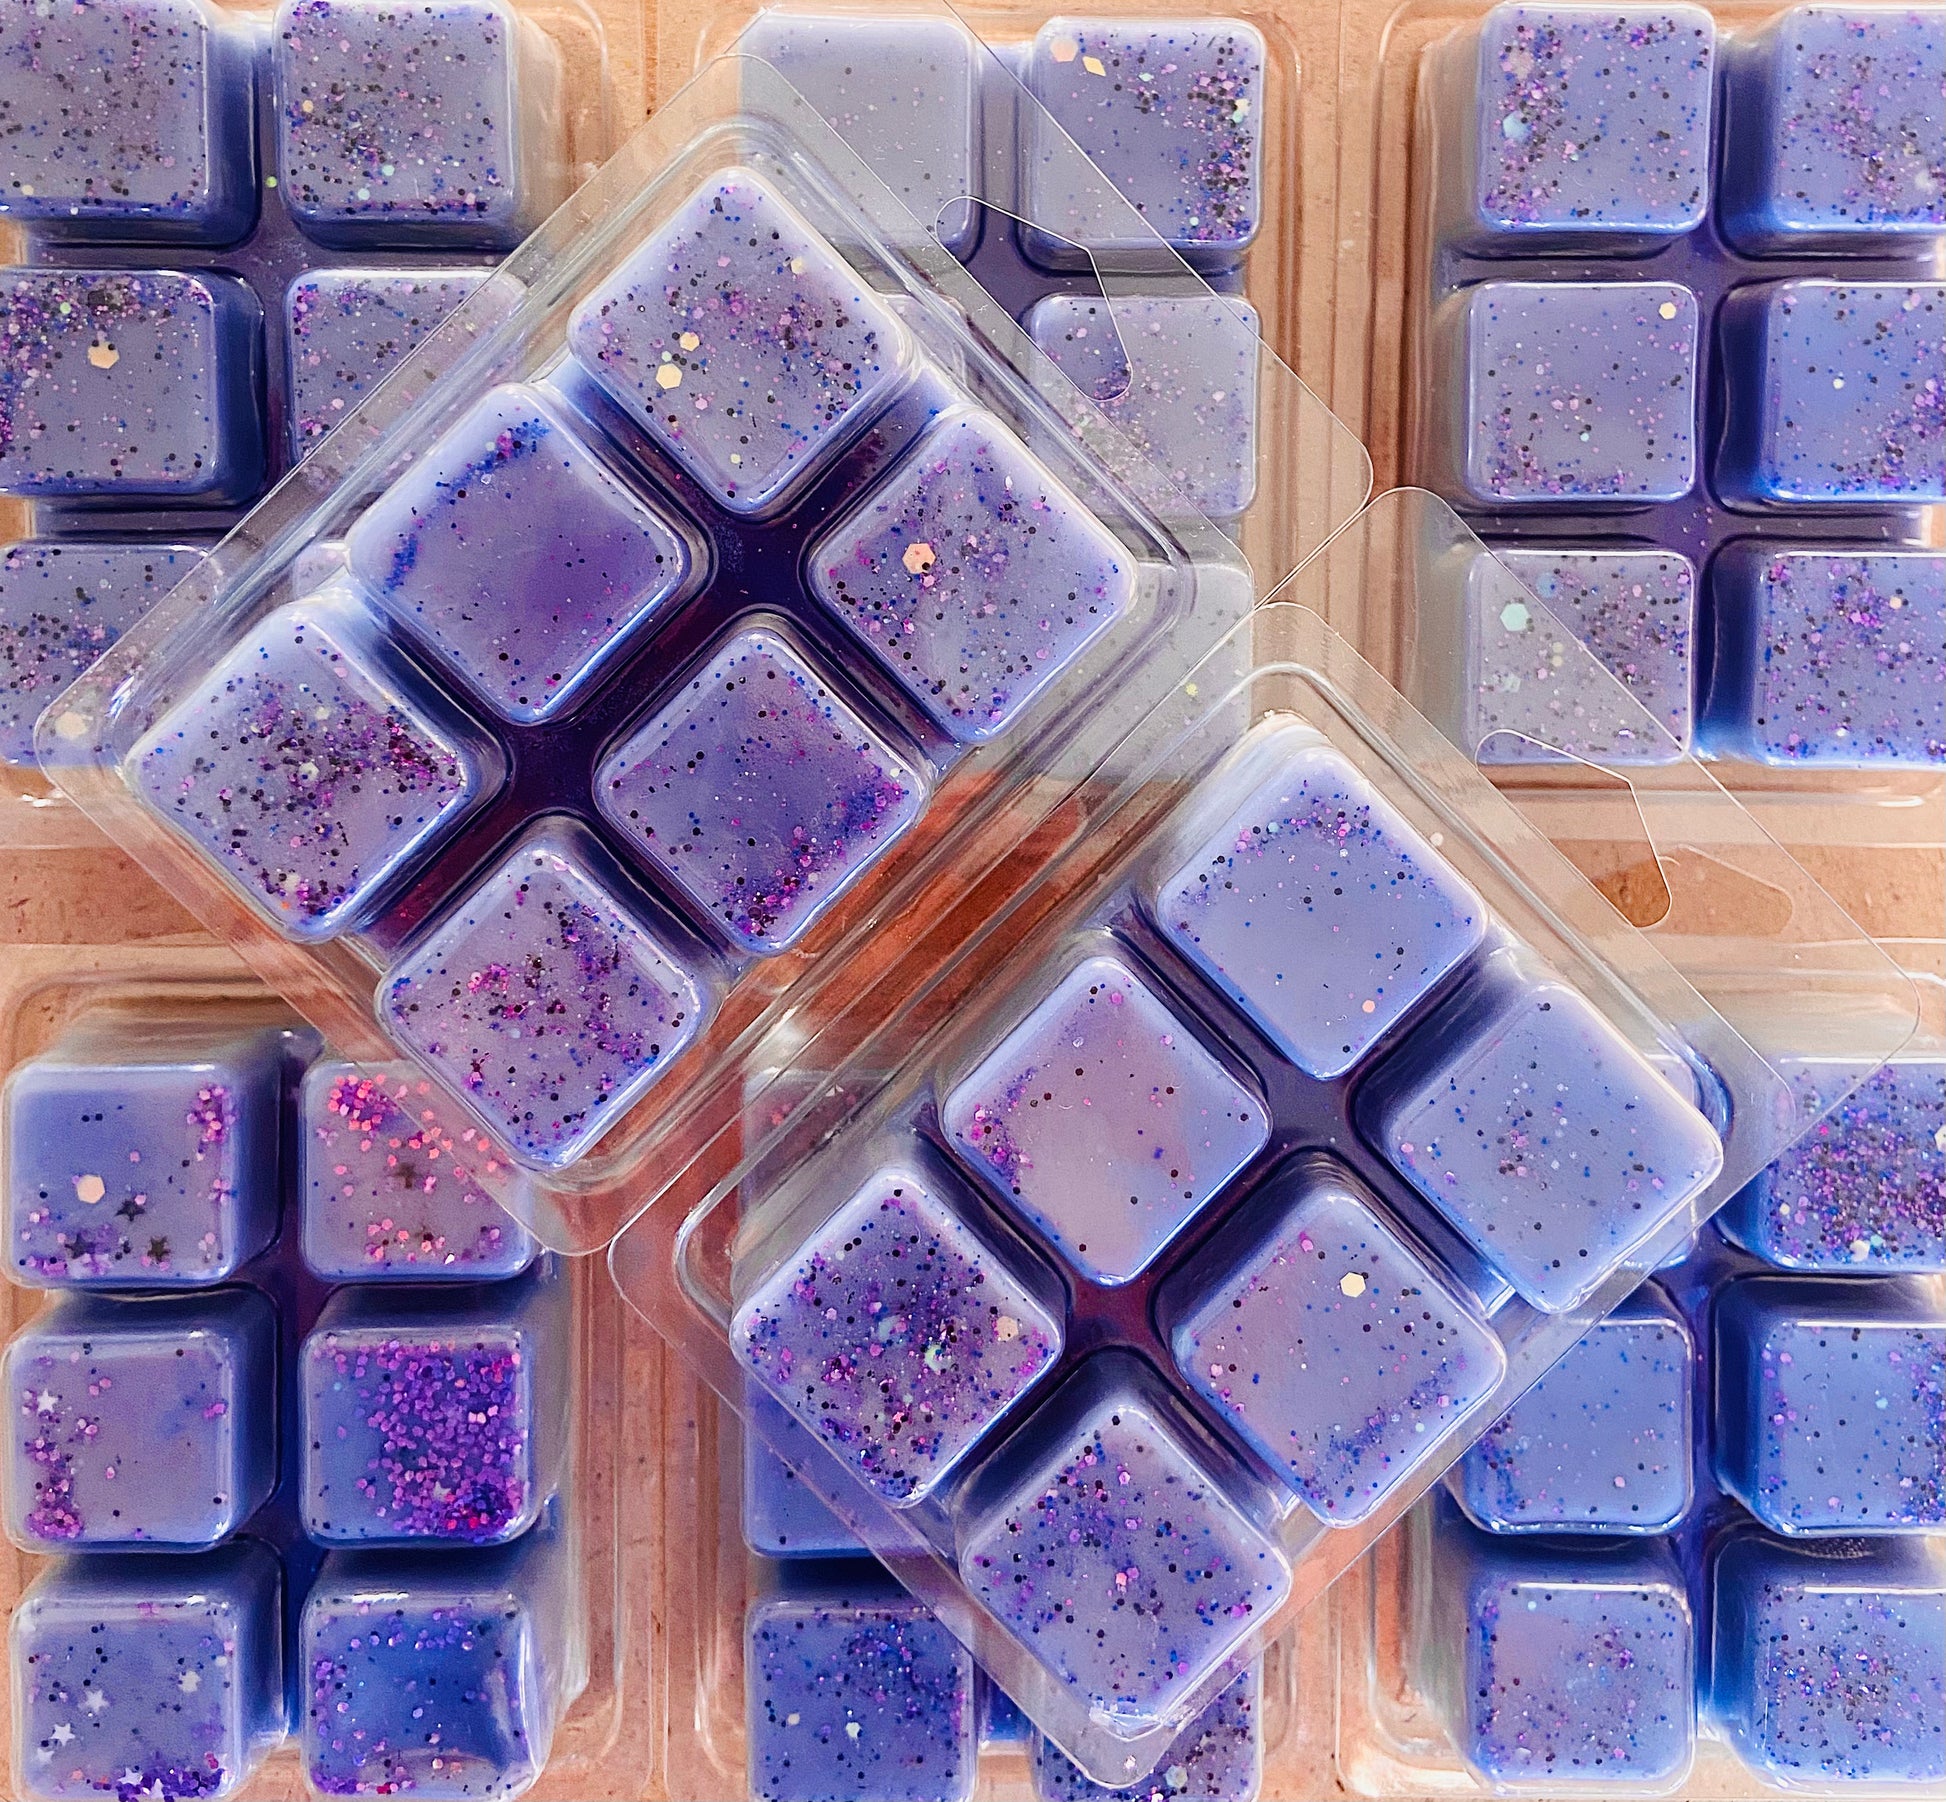 Several packs of Aliens Wax Melts infused with fragrance oils, arranged in a grid pattern by The Soap Gals.